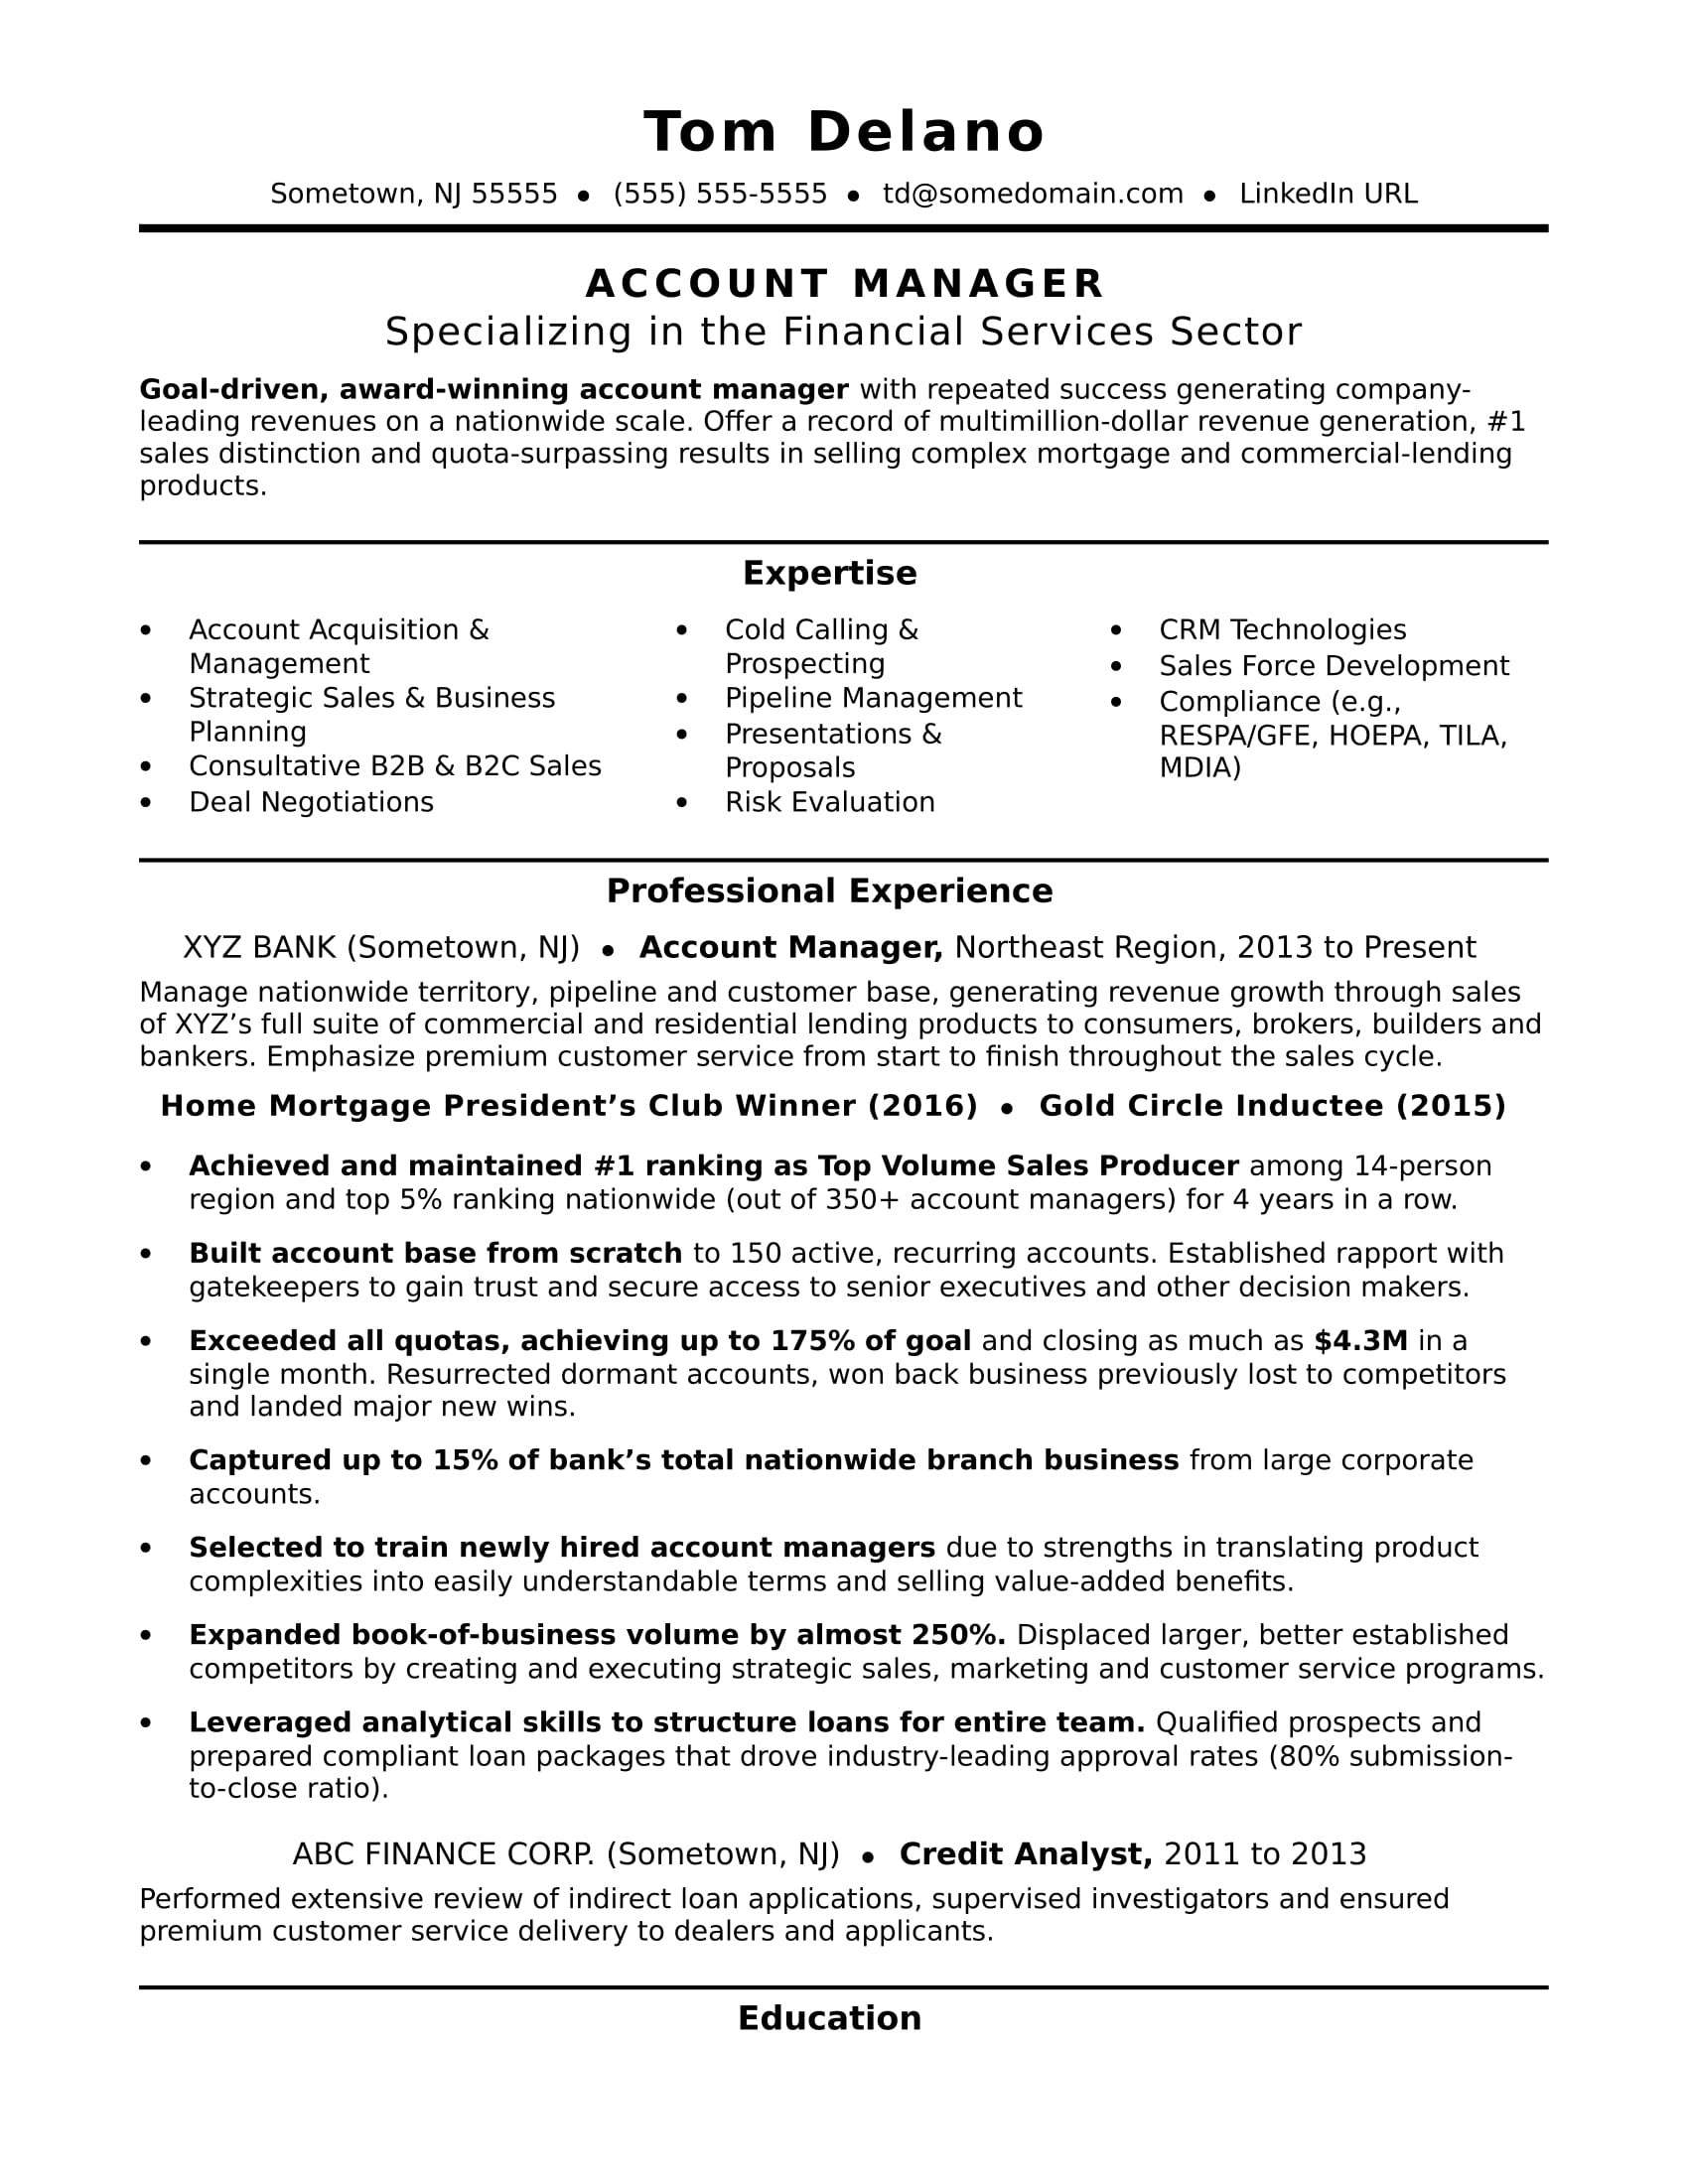 Employee Benefits Account Manager Resume Sample Account Manager Resume Monster.com